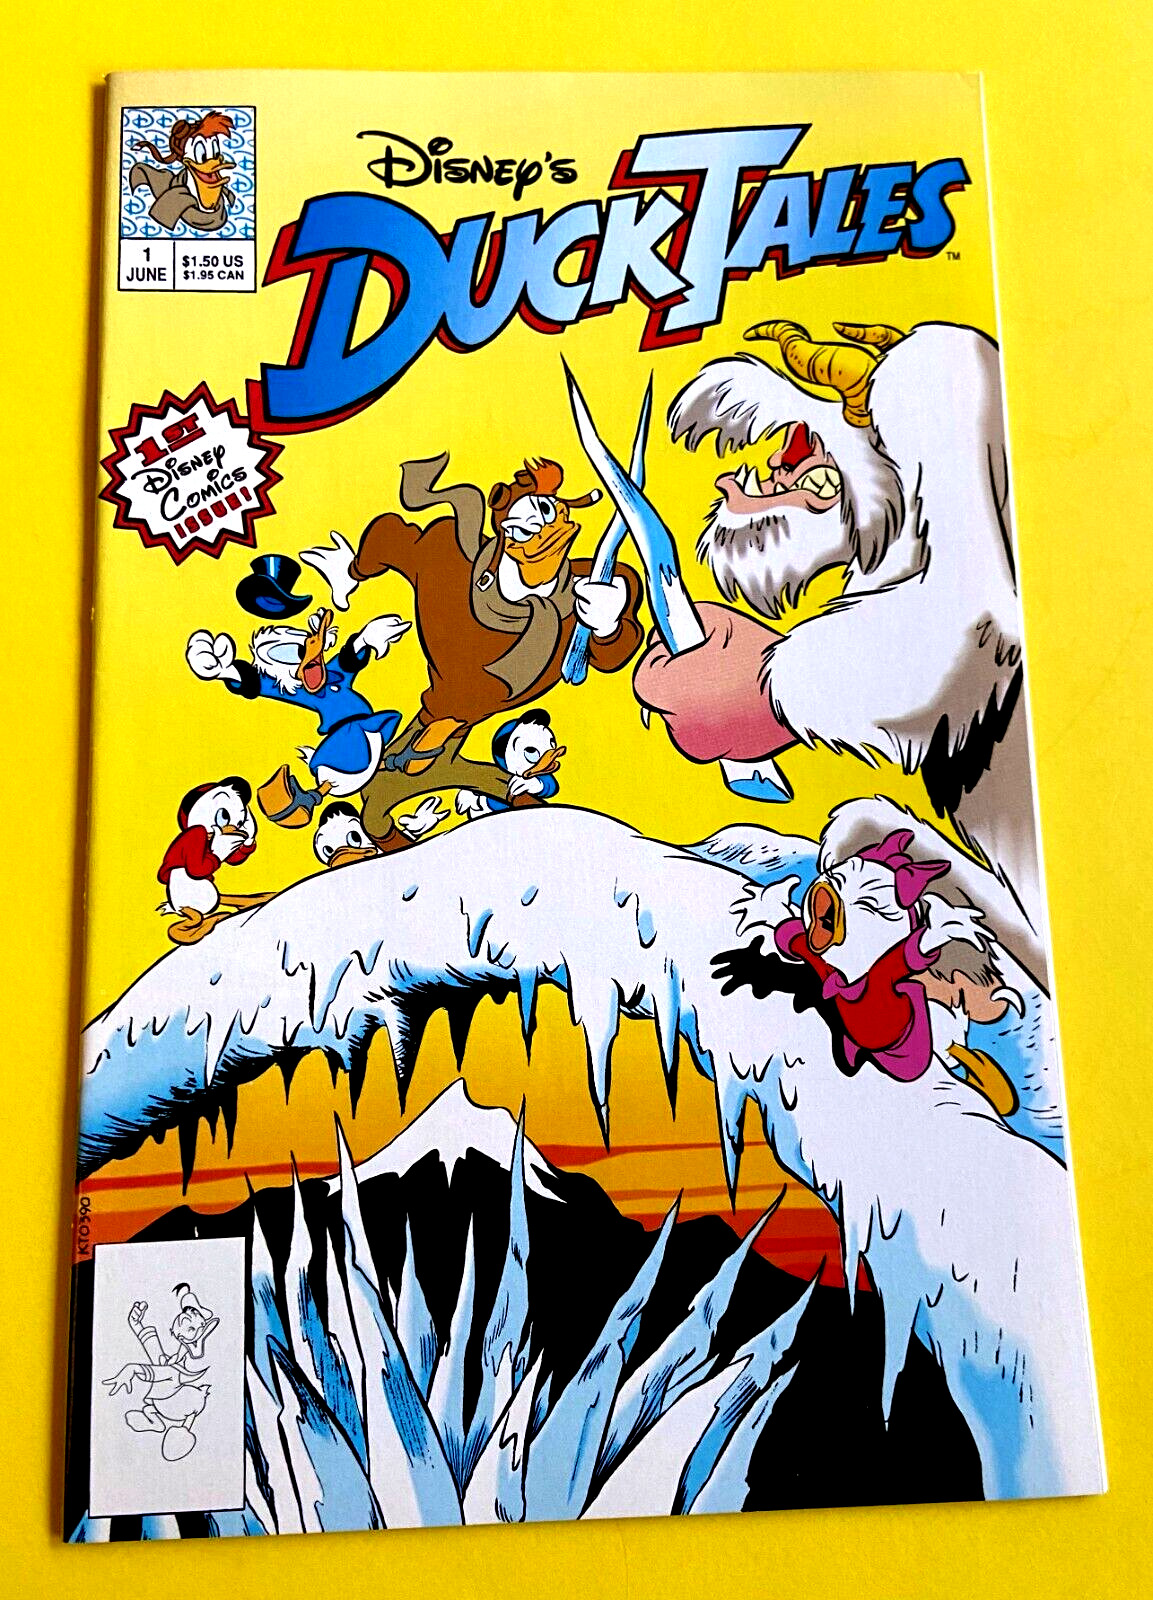 DUCK TALES #1  with   MAGICA DE SPELL after SCROOGE\'S #1  DIME - 1990